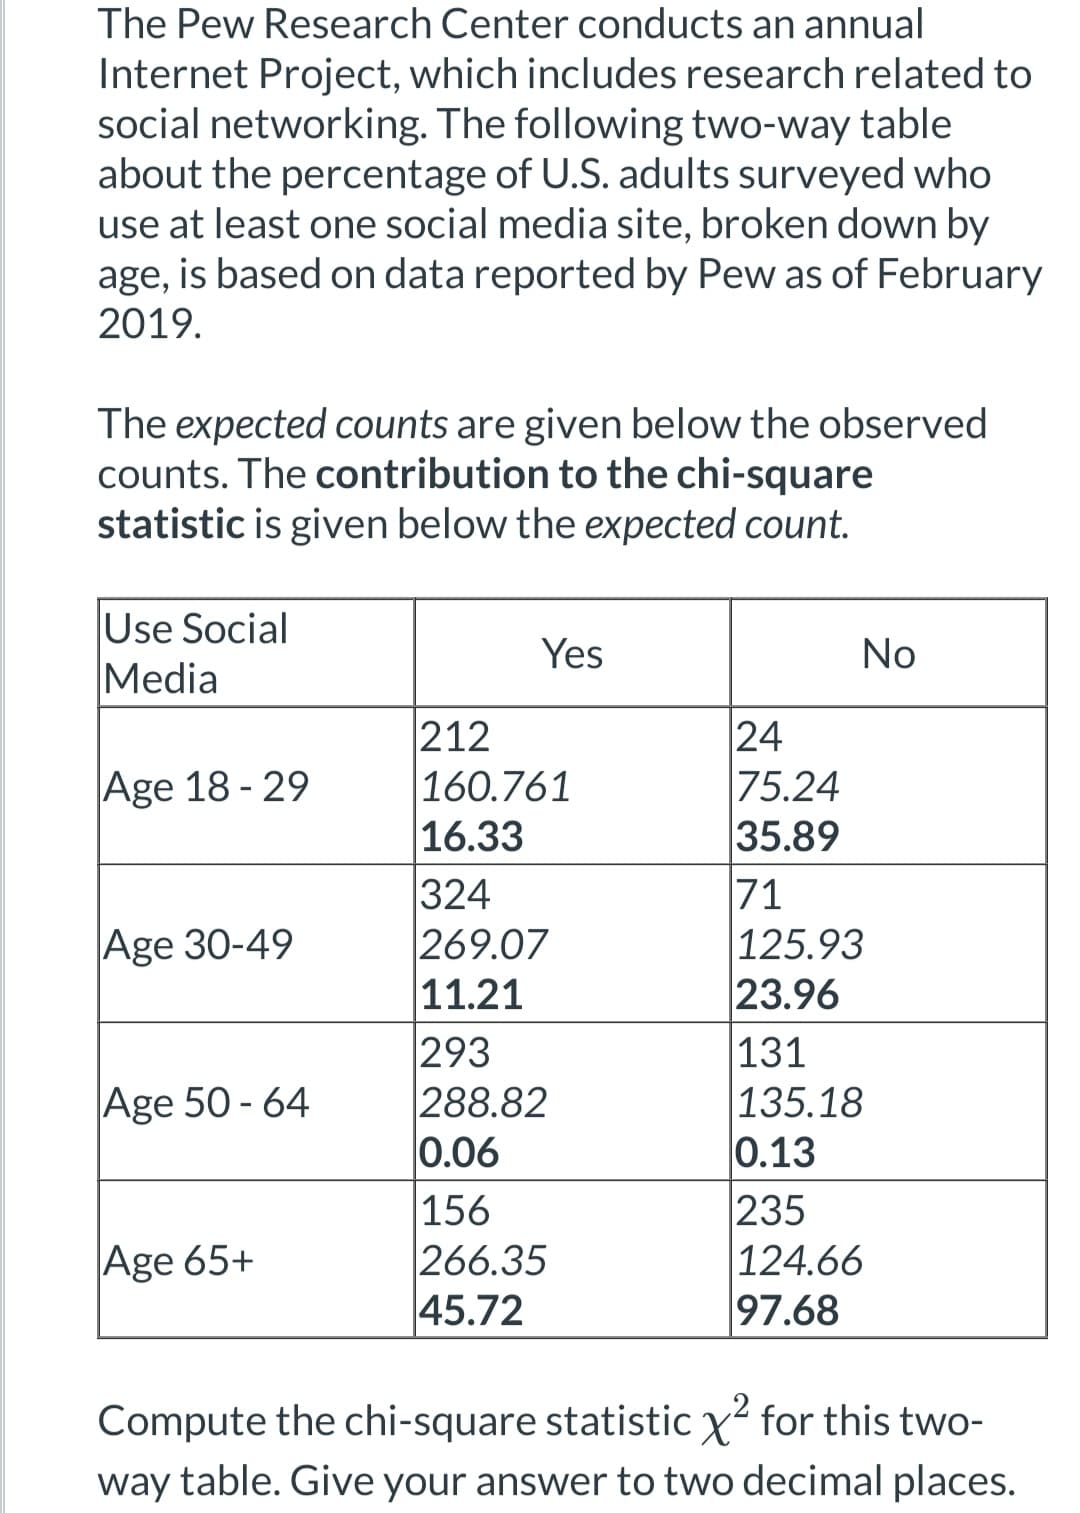 The Pew Research Center conducts an annual
Internet Project, which includes research related to
social networking. The following two-way table
about the percentage of U.S. adults surveyed who
use at least one social media site, broken down by
age, is based on data reported by Pew as of February
2019.
The expected counts are given below the observed
counts. The contribution to the chi-square
statistic is given below the expected count.
Use Social
Media
Age 18-29
Age 30-49
Age 50-64
Age 65+
Yes
212
160.761
16.33
324
269.07
11.21
293
288.82
0.06
156
266.35
45.72
No
24
75.24
35.89
71
125.93
23.96
131
135.18
0.13
235
124.66
97.68
Compute the chi-square statistic X² for this two-
way table. Give your answer to two decimal places.